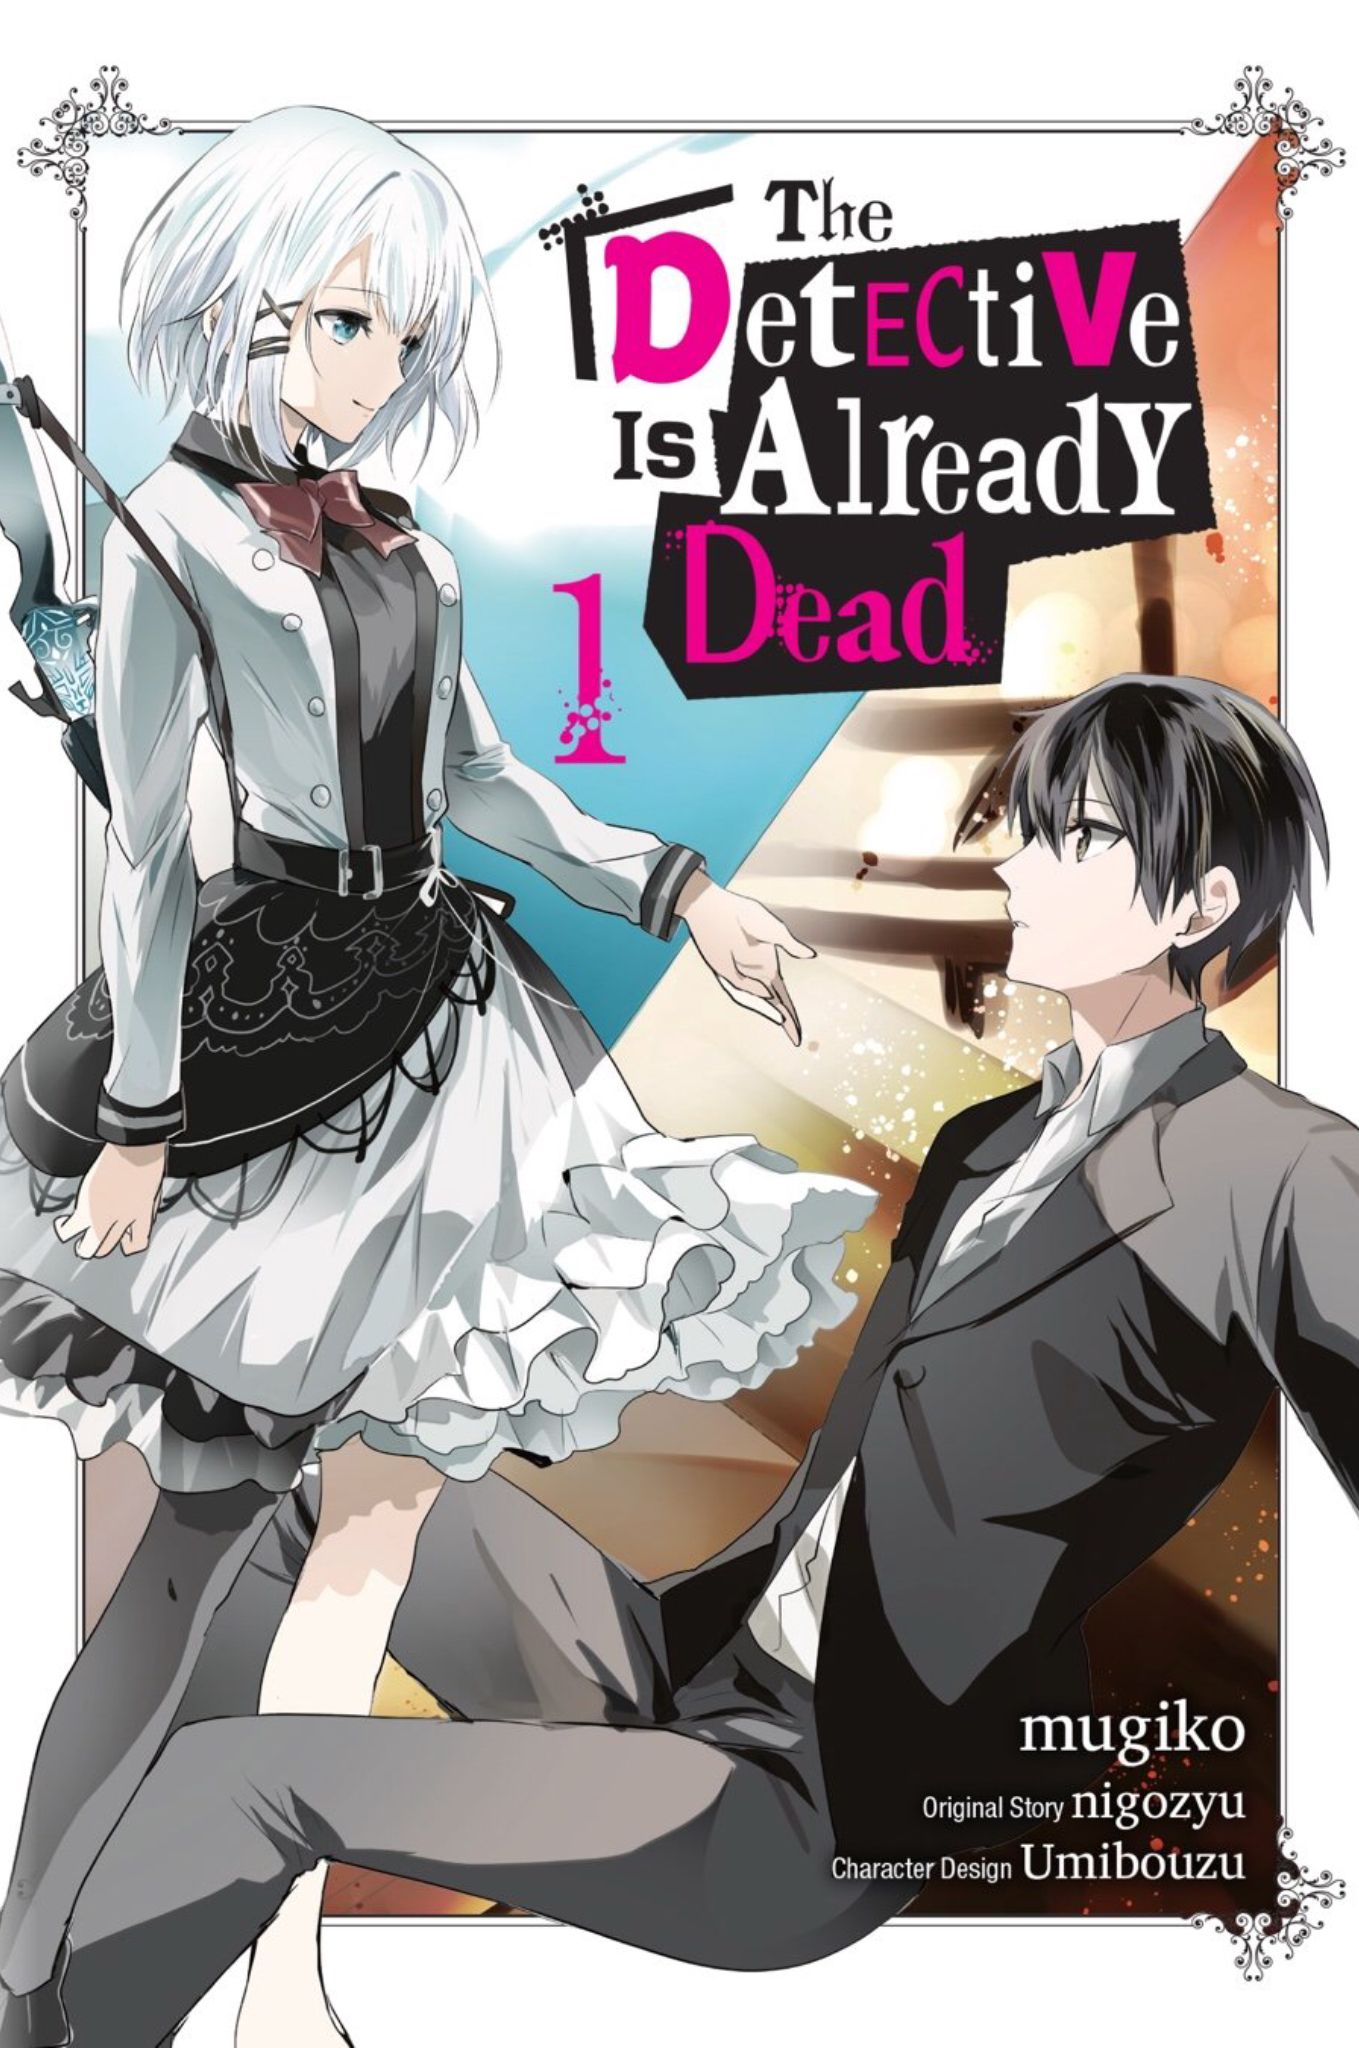 REVIEW: The Detective Is Already Dead Manga Vol. 1